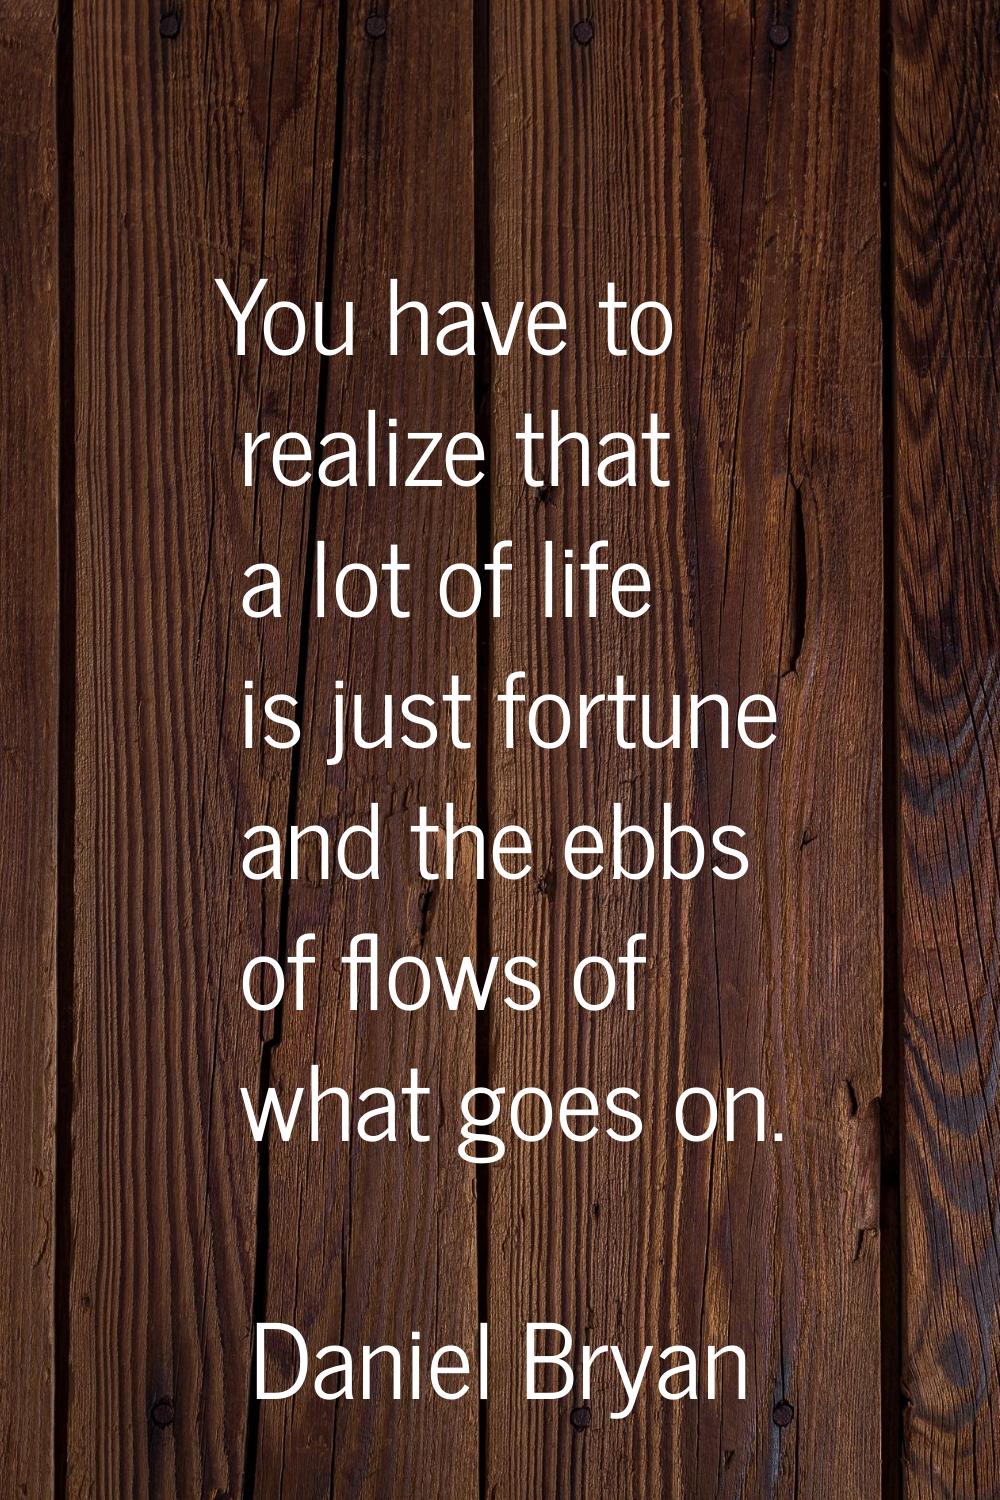 You have to realize that a lot of life is just fortune and the ebbs of flows of what goes on.